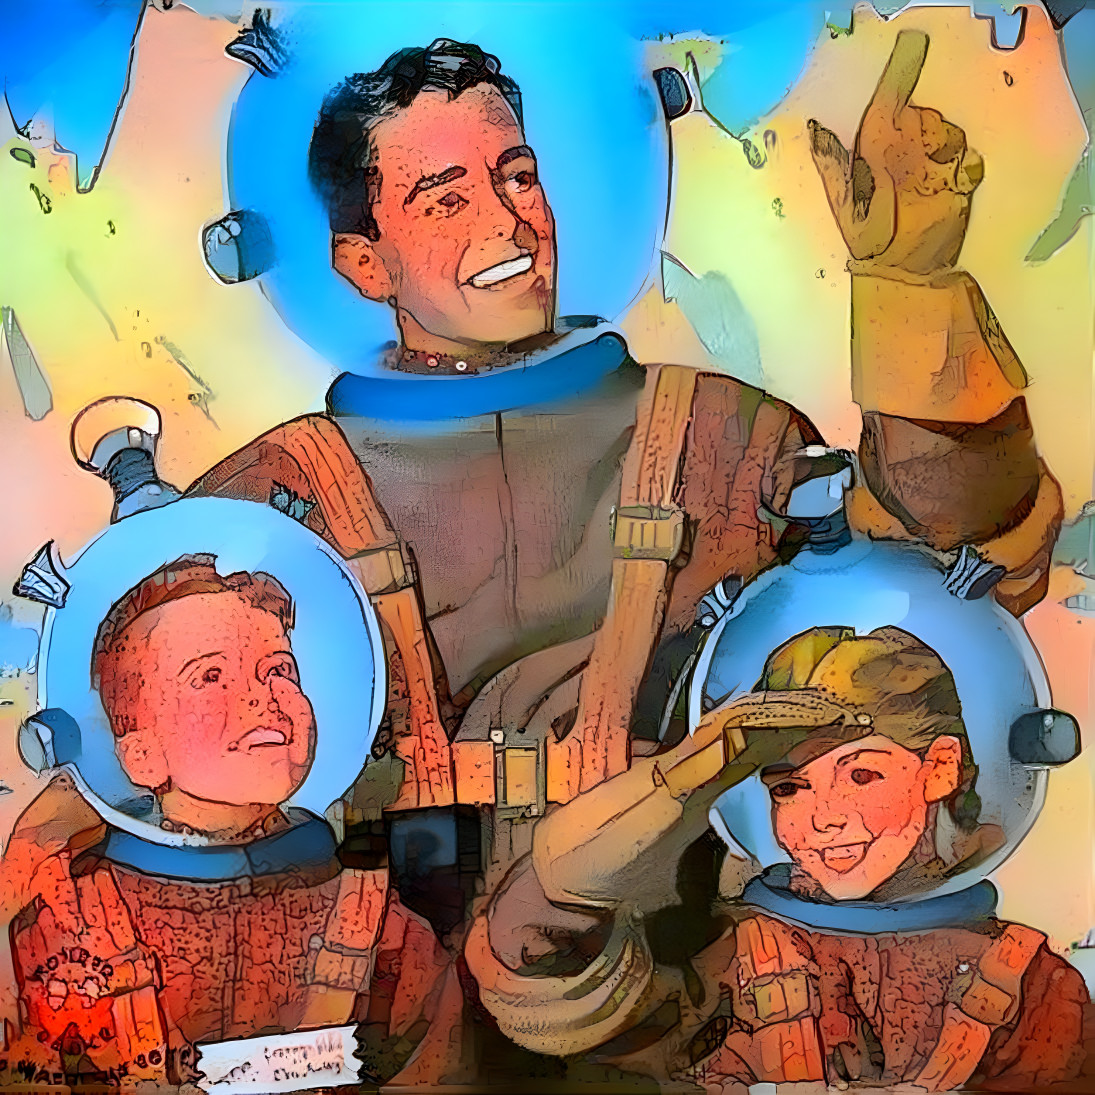 1950s Space Family of the Deep Dream Future